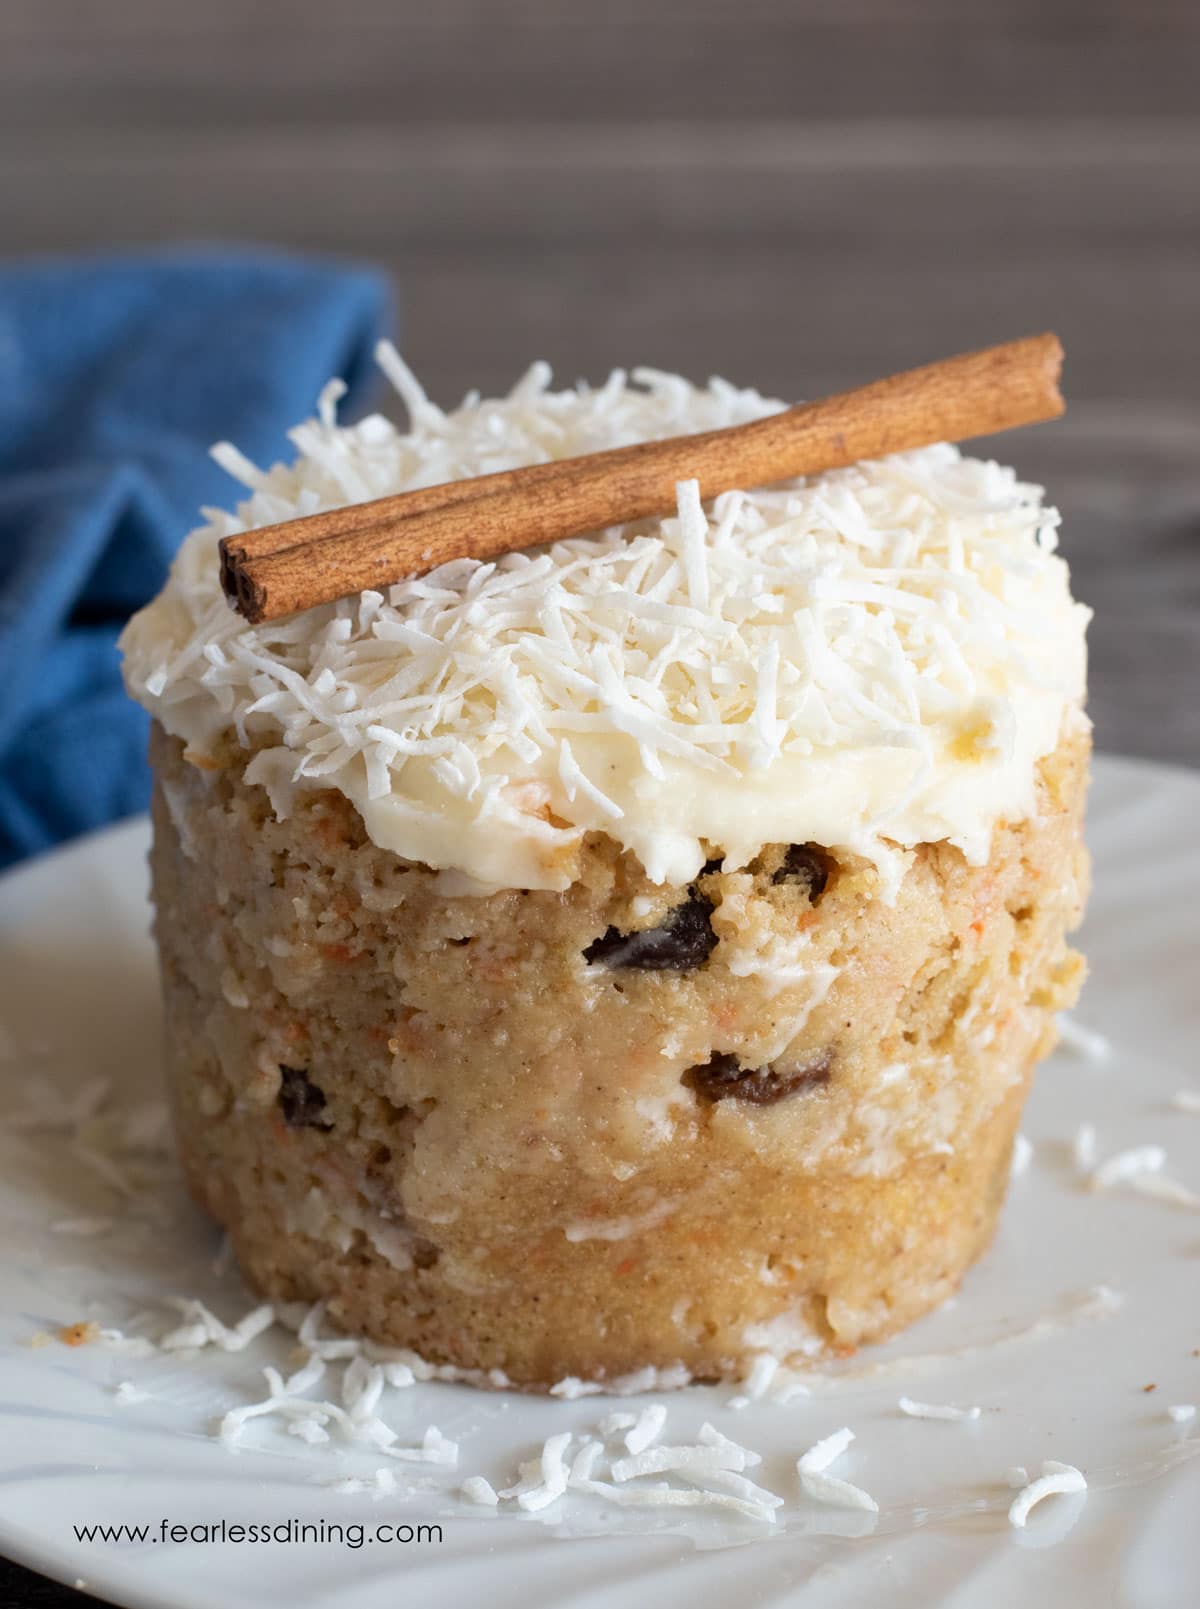 A carrot mug cake on a plate with frosting and shredded coconut on top.